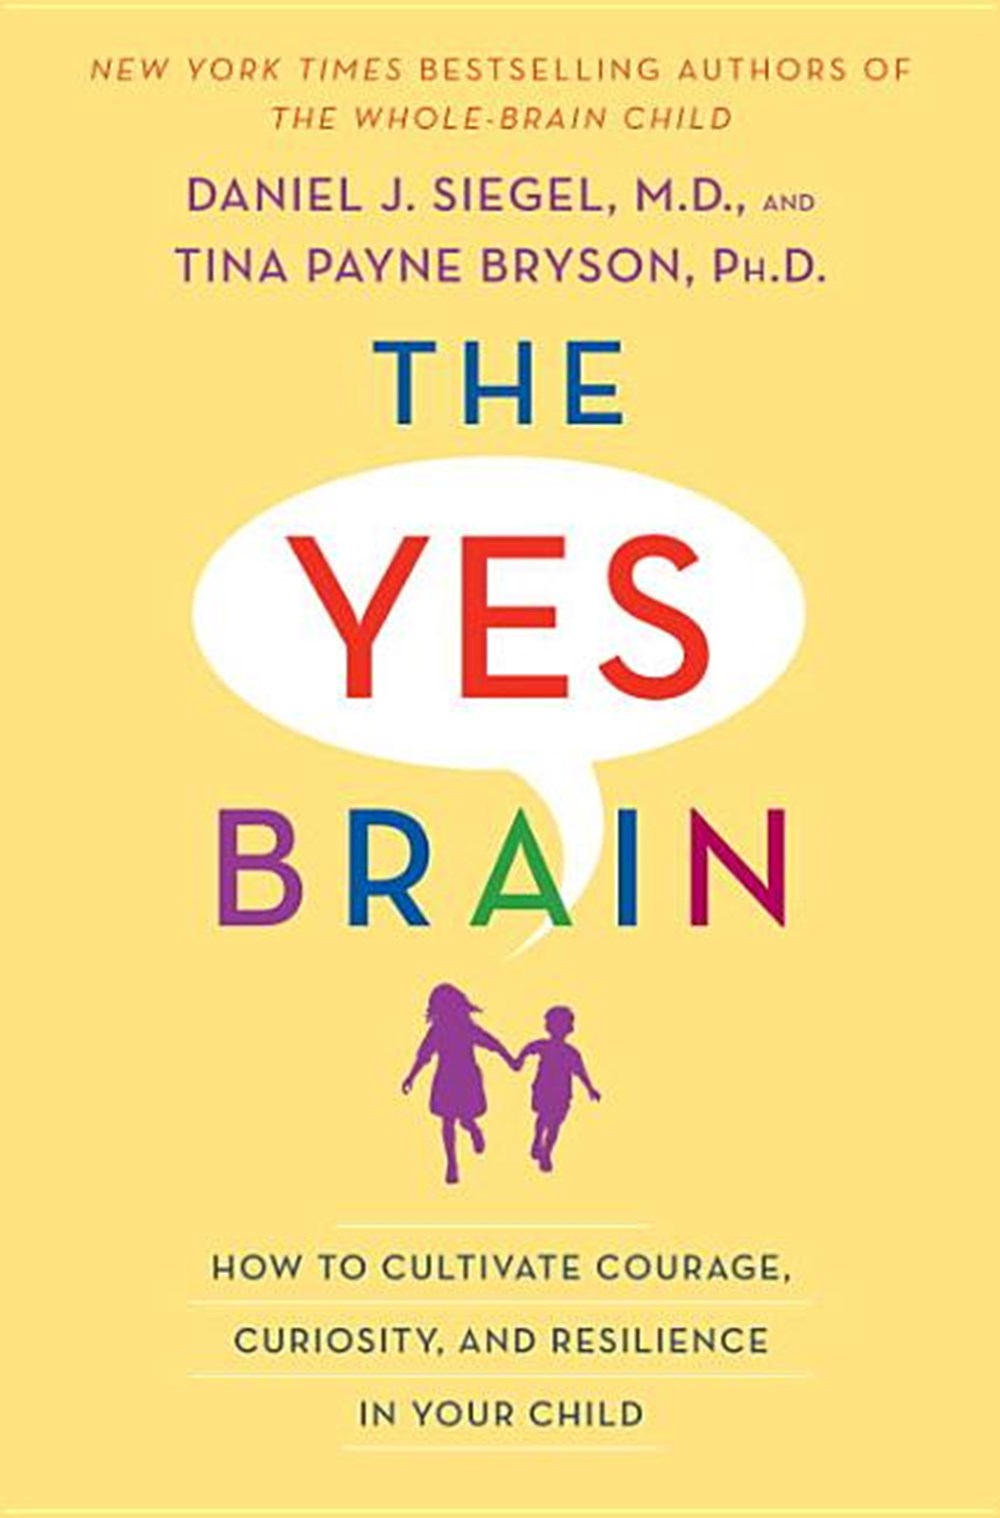 Yes Brain: How to Cultivate Courage, Curiosity, and Resilience in Your Child